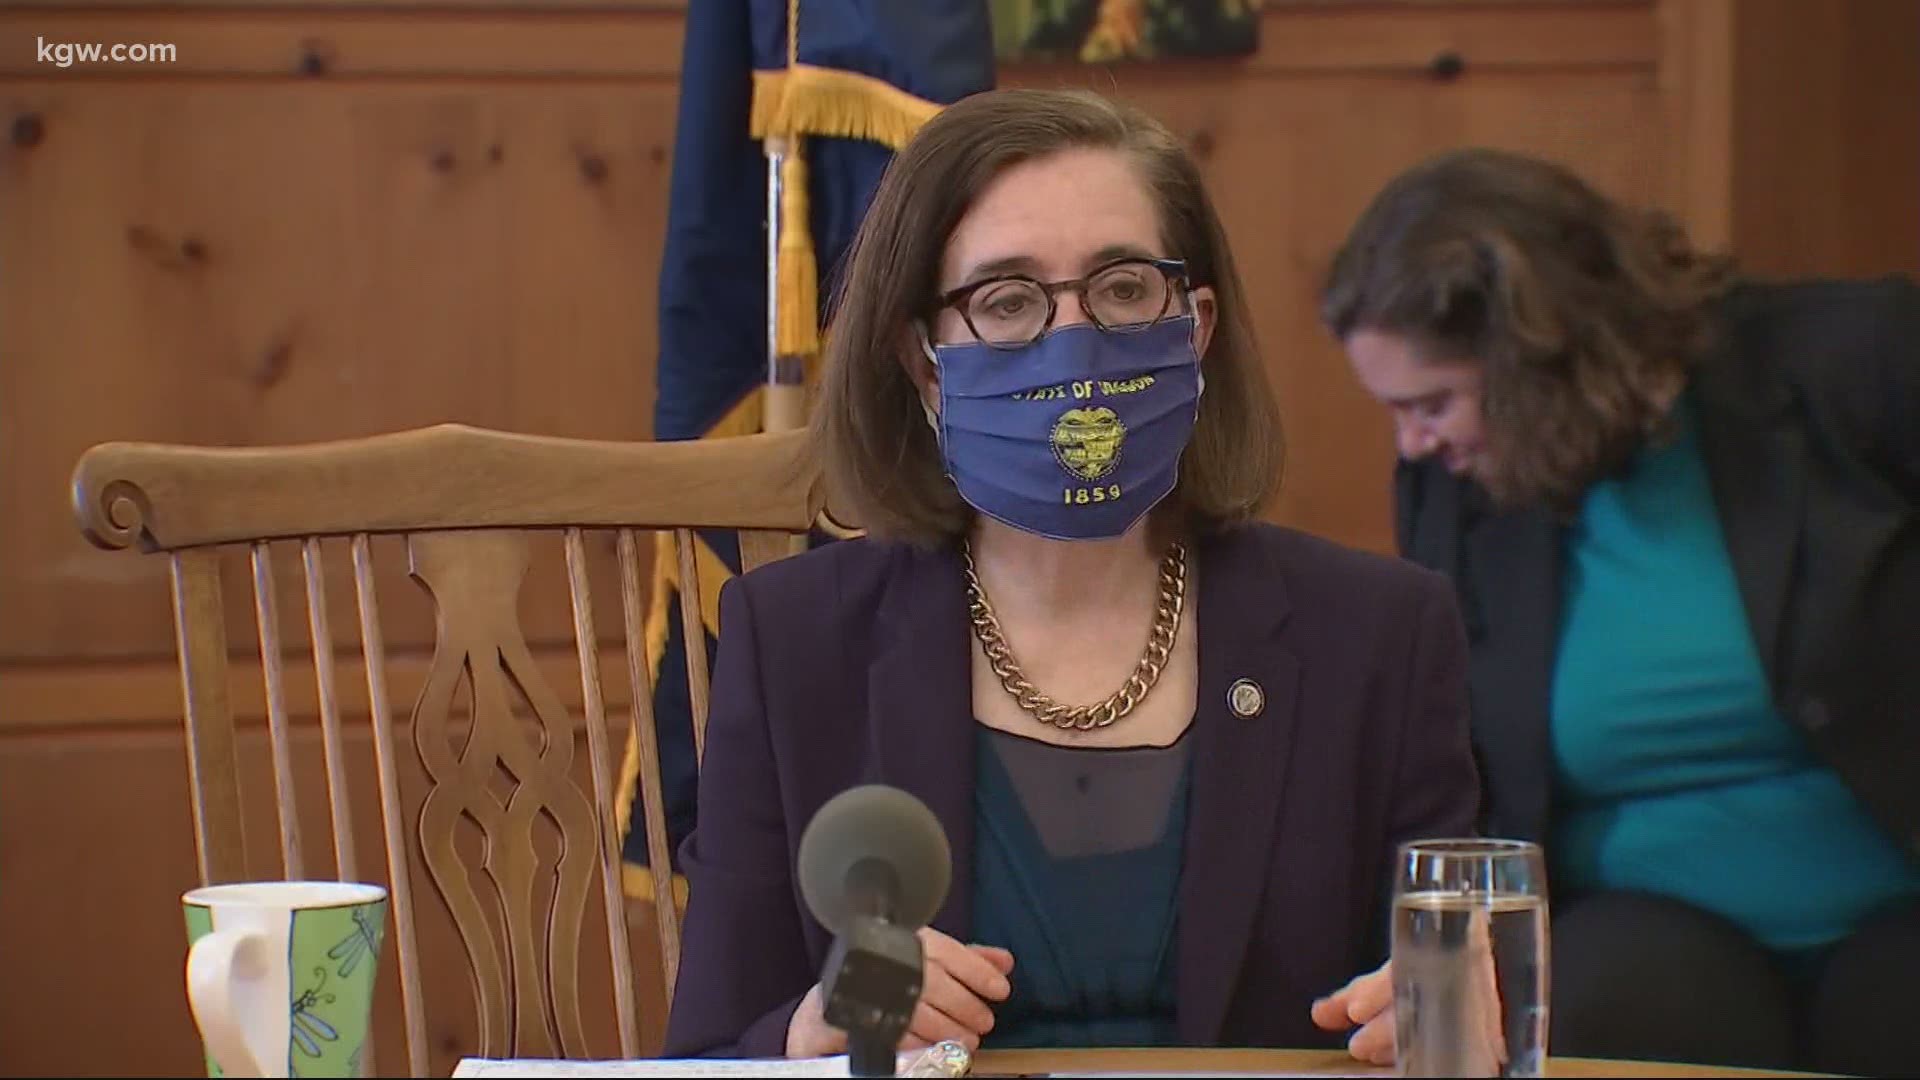 Saturday, Oregon Governor Kate Brown pleaded with the state to take the pandemic seriously and wear a mask.